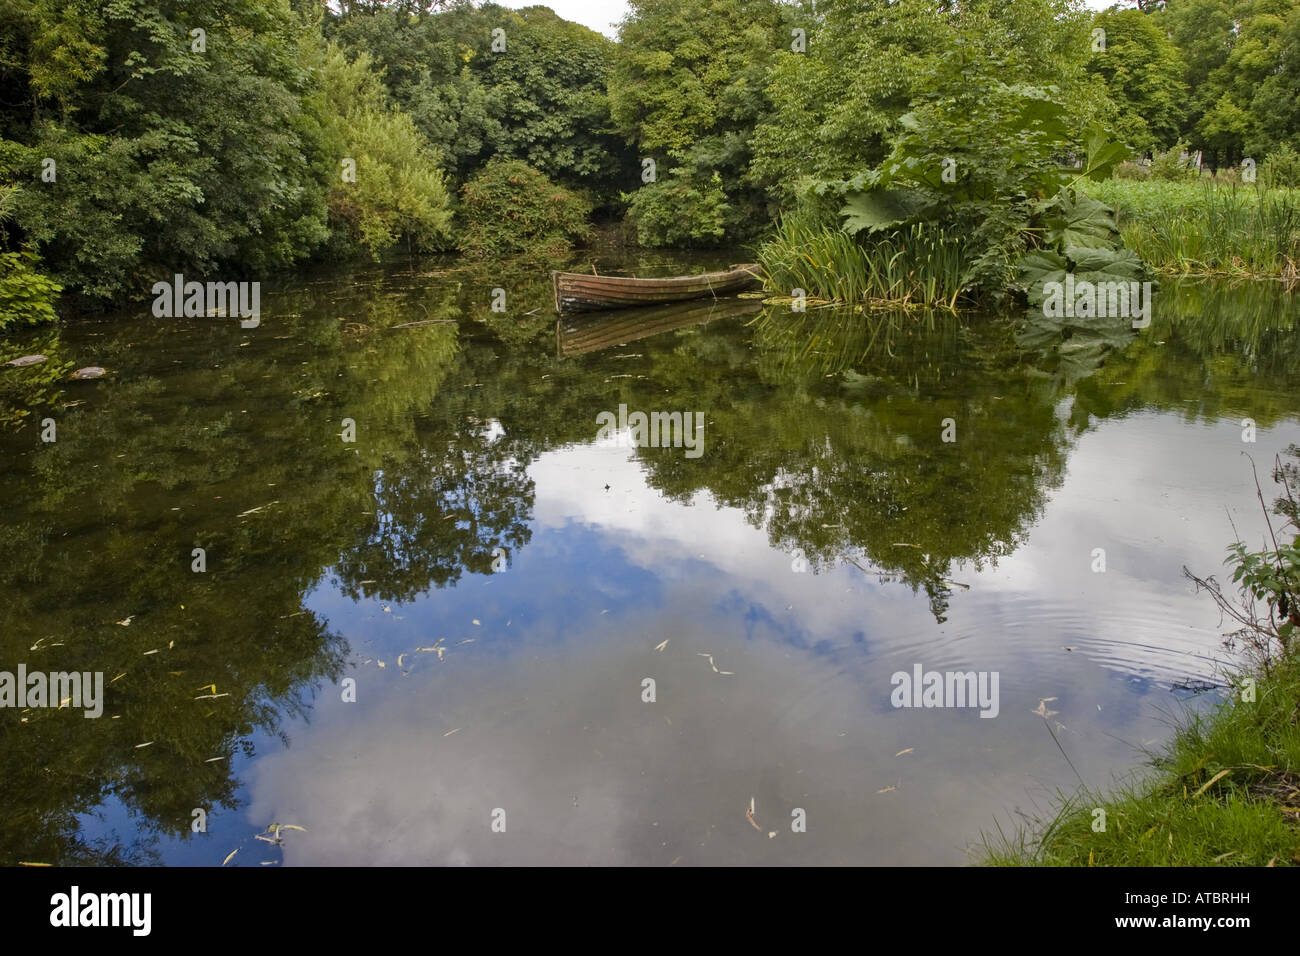 pond with rawing boat, Ireland, Clarens, Bunratty Castle and Folk Park, Bunratty Stock Photo